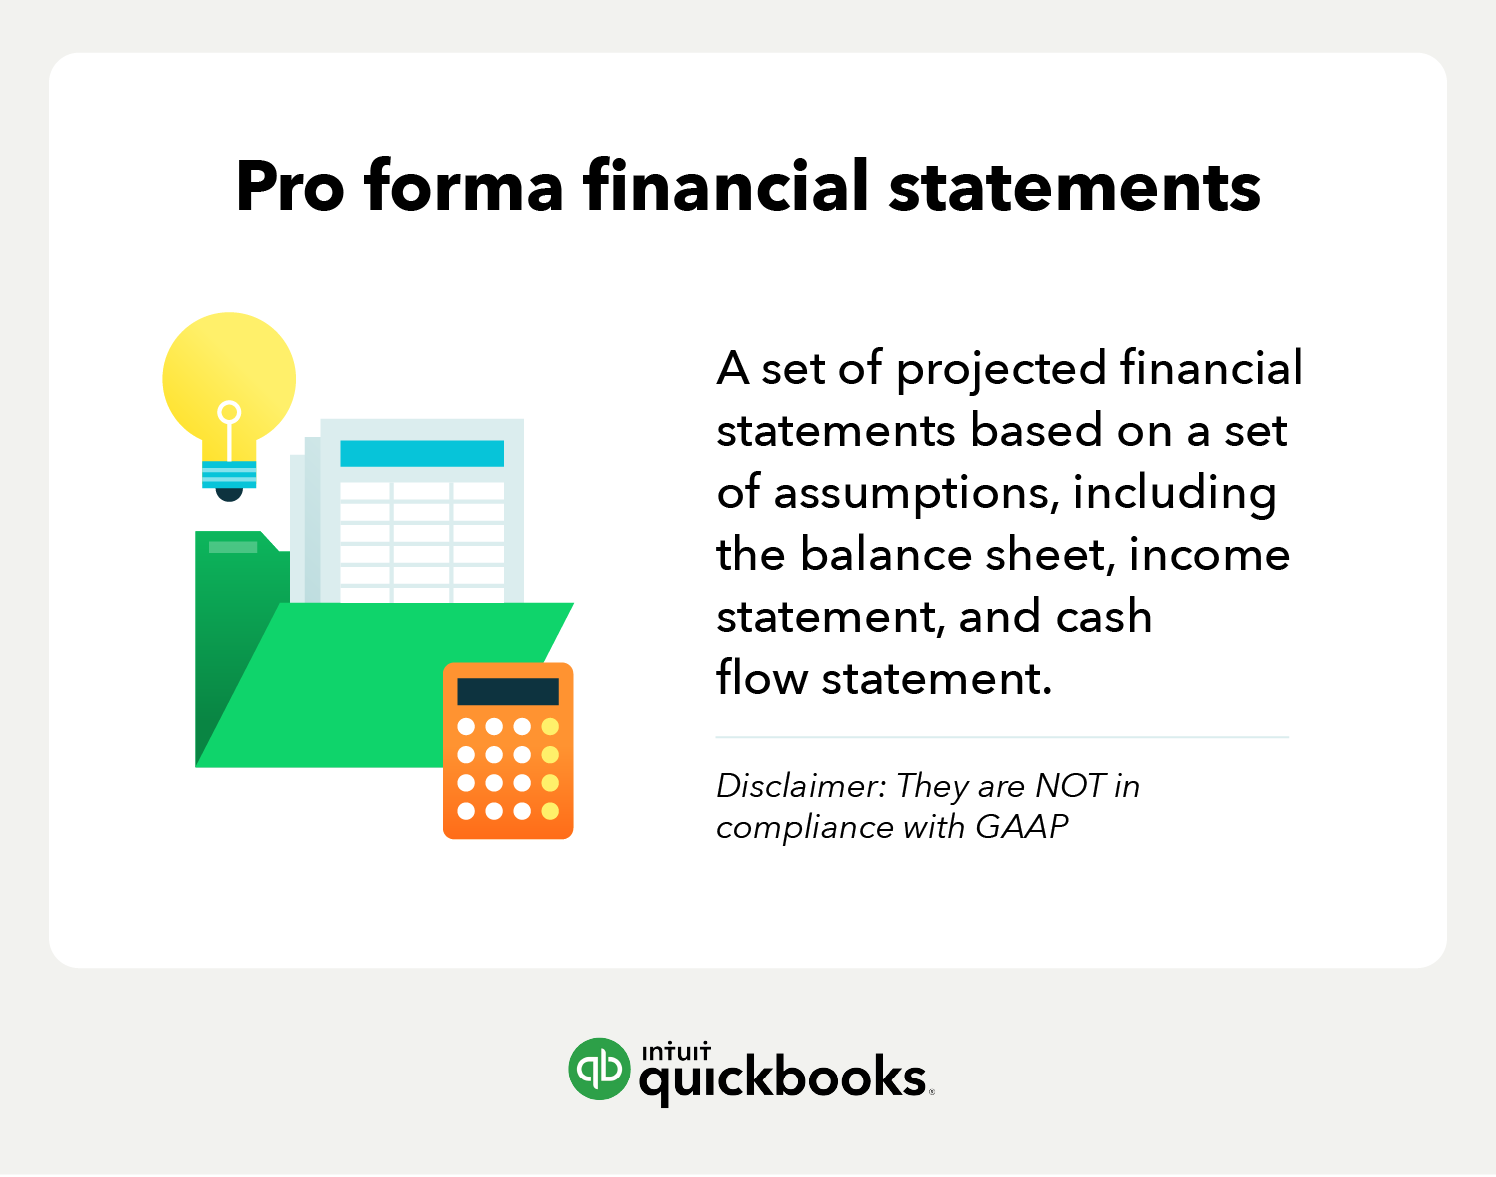 Pro forma financial statements - a set of projected financial statements based on a set of assumptions, including the balance sheet, income statement, and cash flow statement.